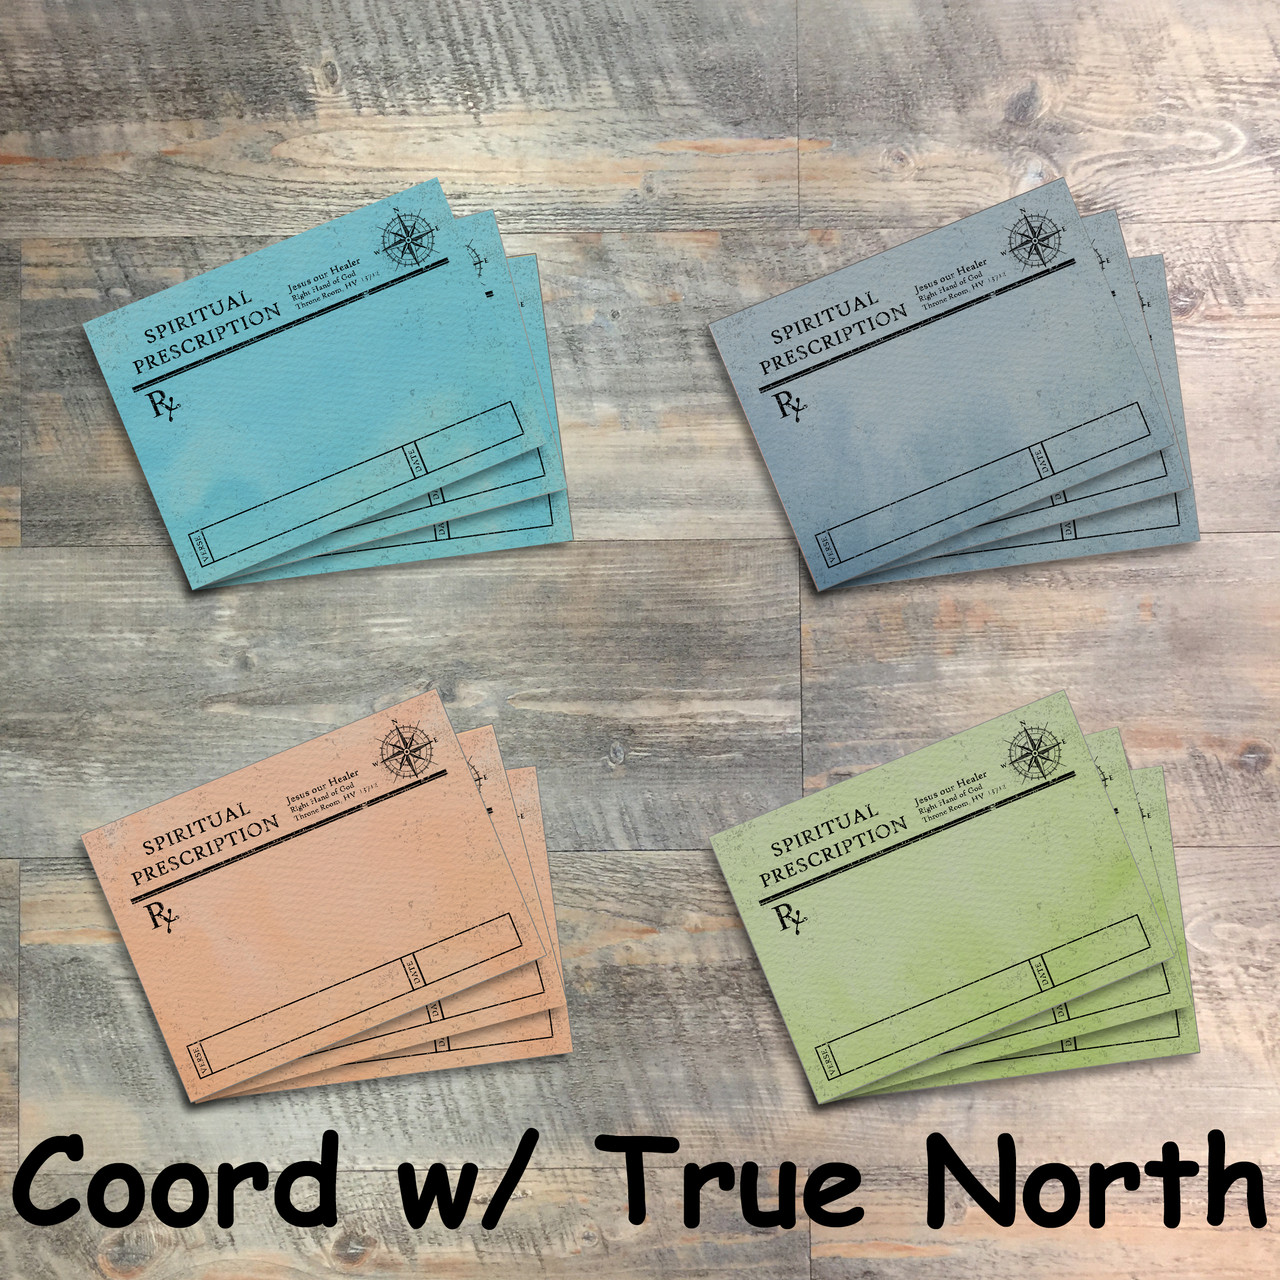 True North Spiritual Prescription Journaling Cards - 12 3x4 Cards in Colors to Match Kit